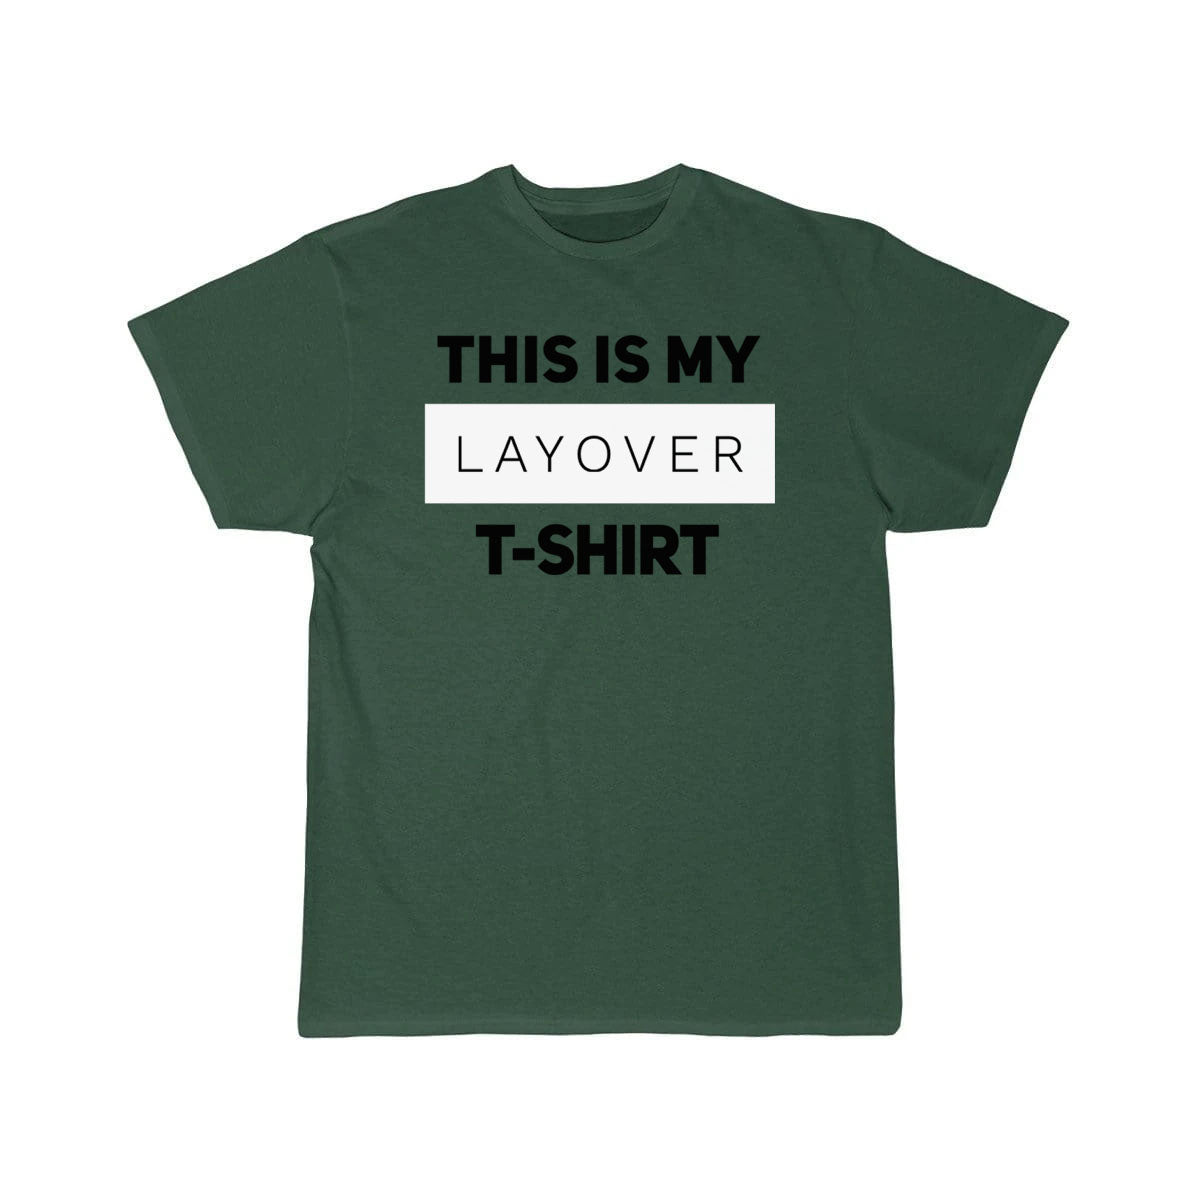 This is my layover T-SHIRT THE AV8R